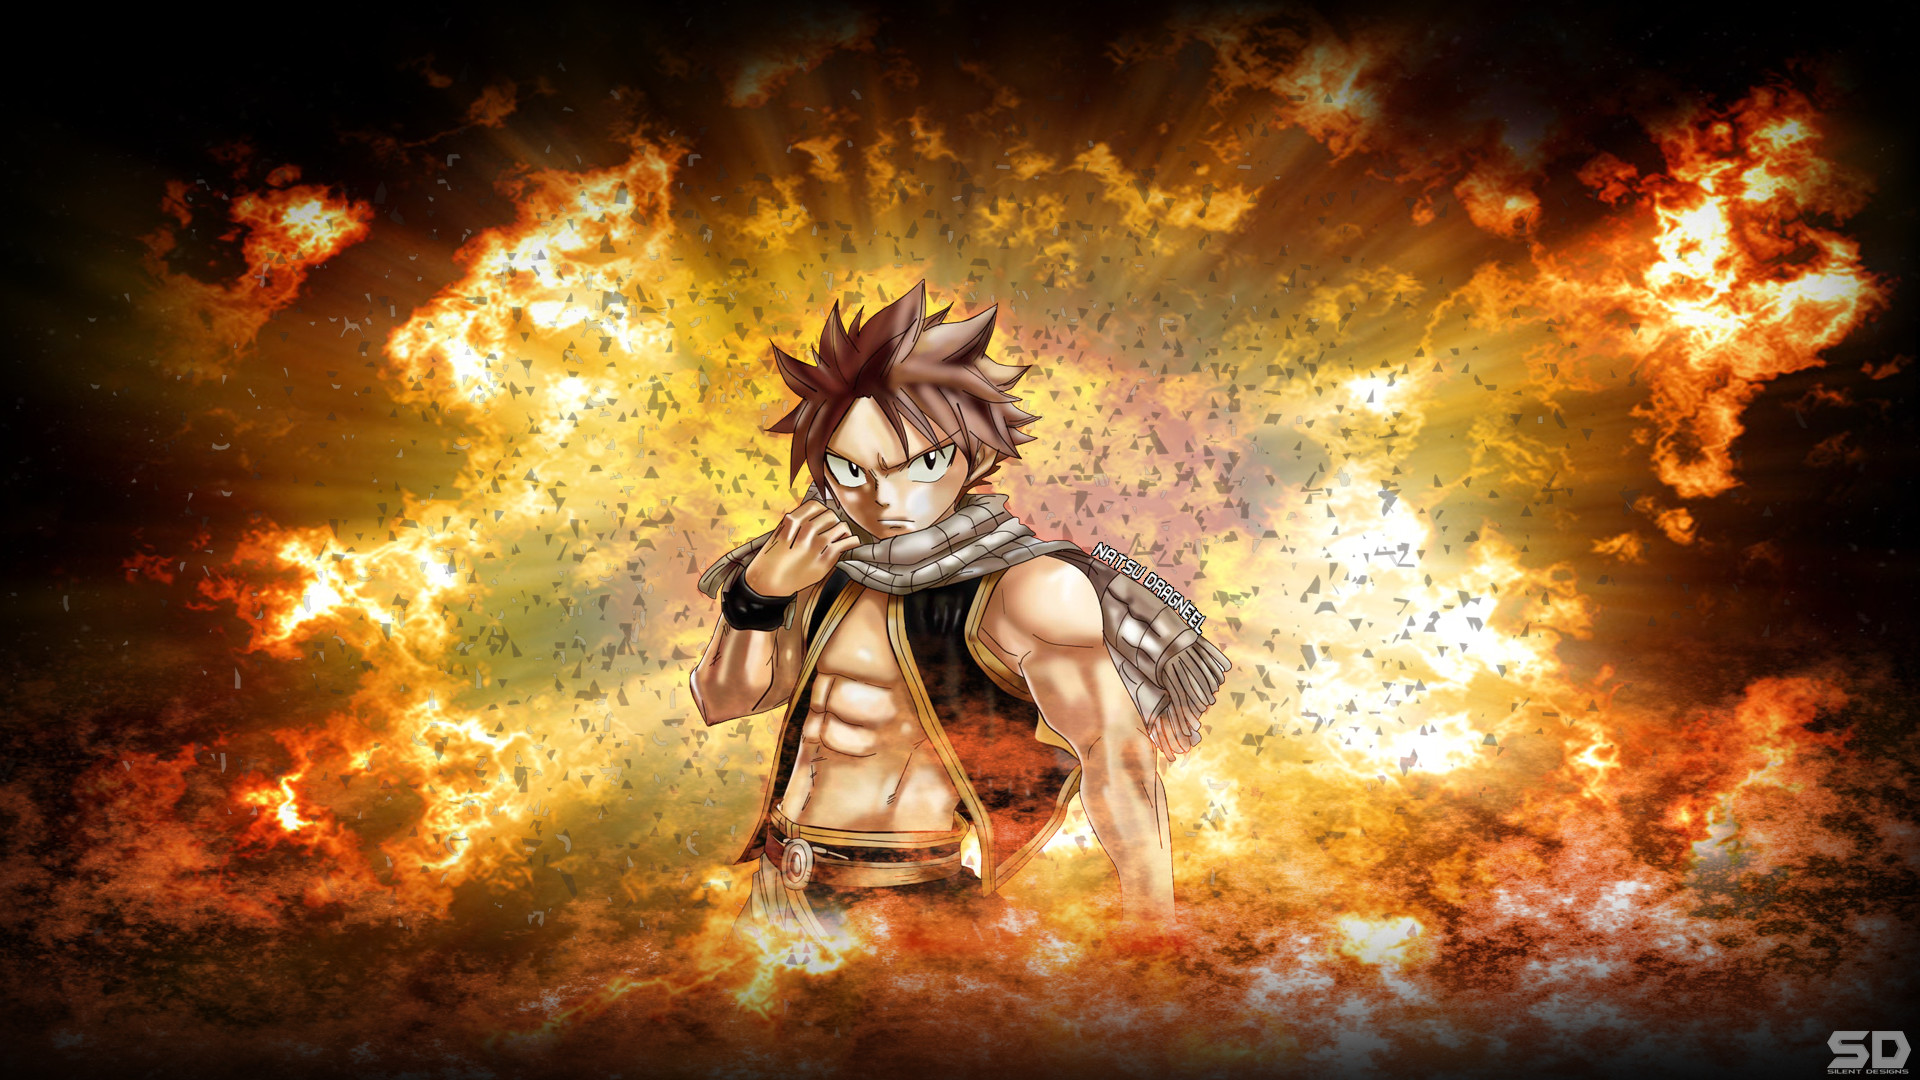 1920x1080 Fairy Tail Natsu Wallpapers For Android On Wallpaper 1080p HD